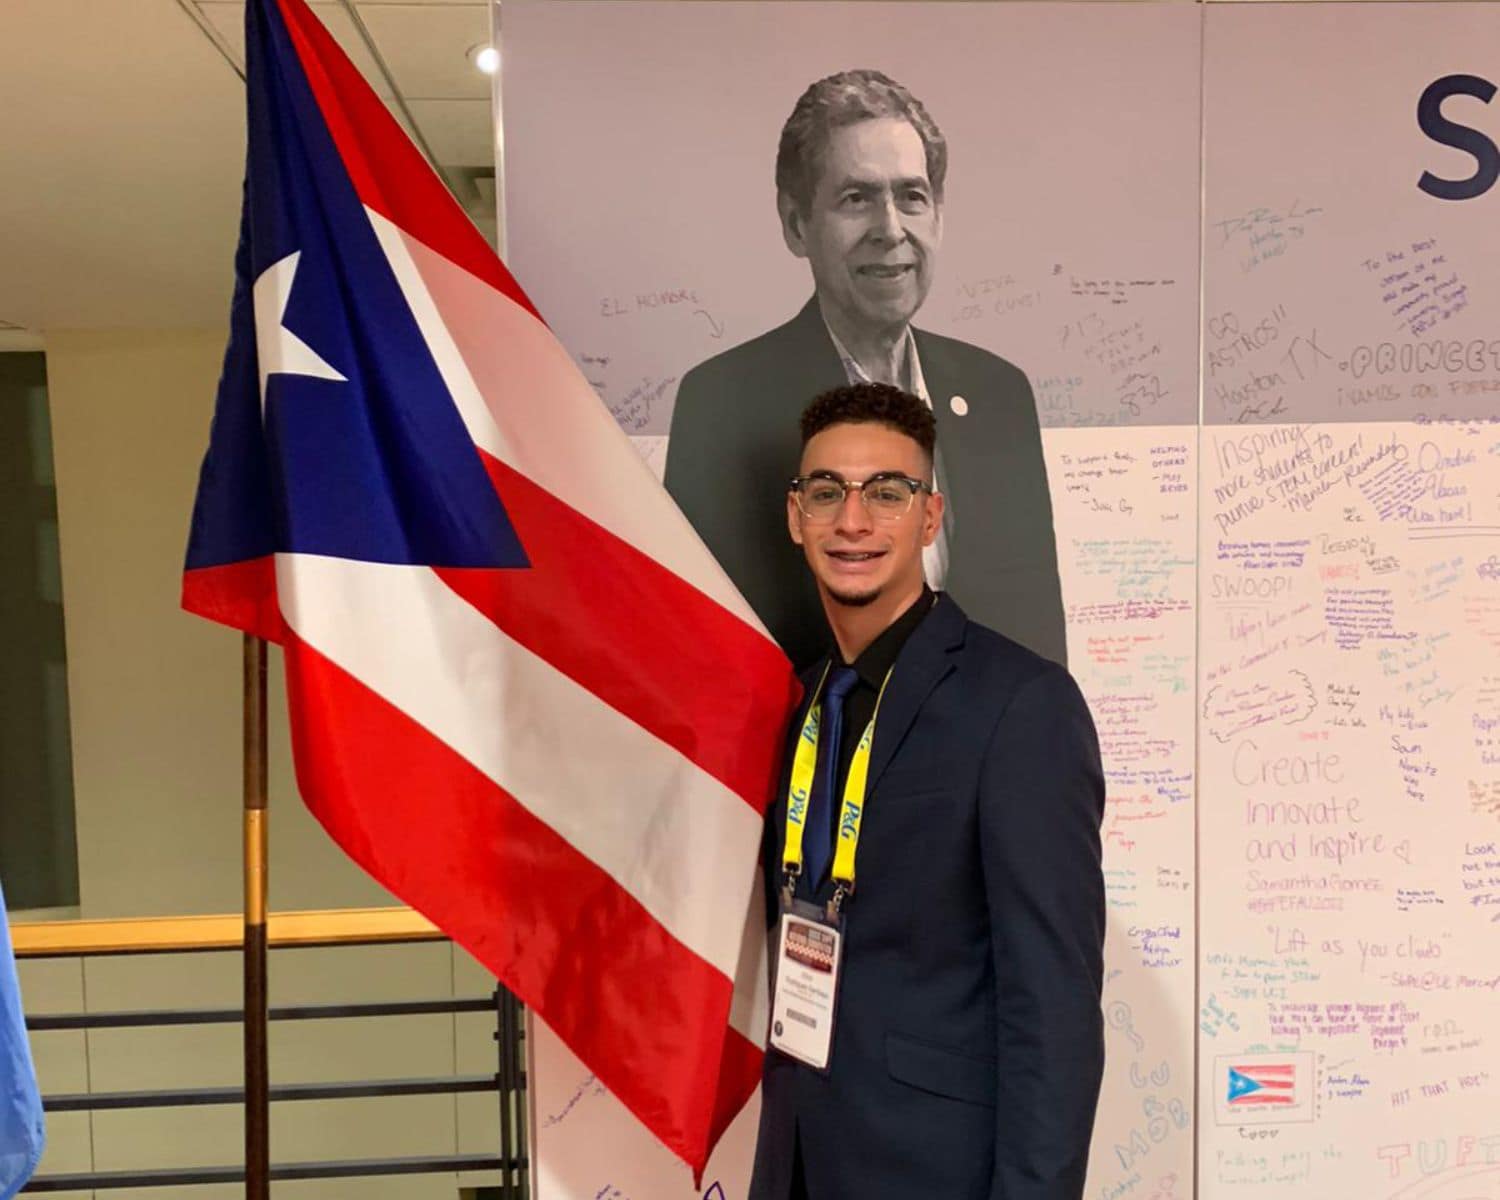 Rodriguez at the 2022 Society of Hispanic Professional Engineers (SHPE) national convention in Charlotte, NC. (Photo: Elliot Rodriguez)